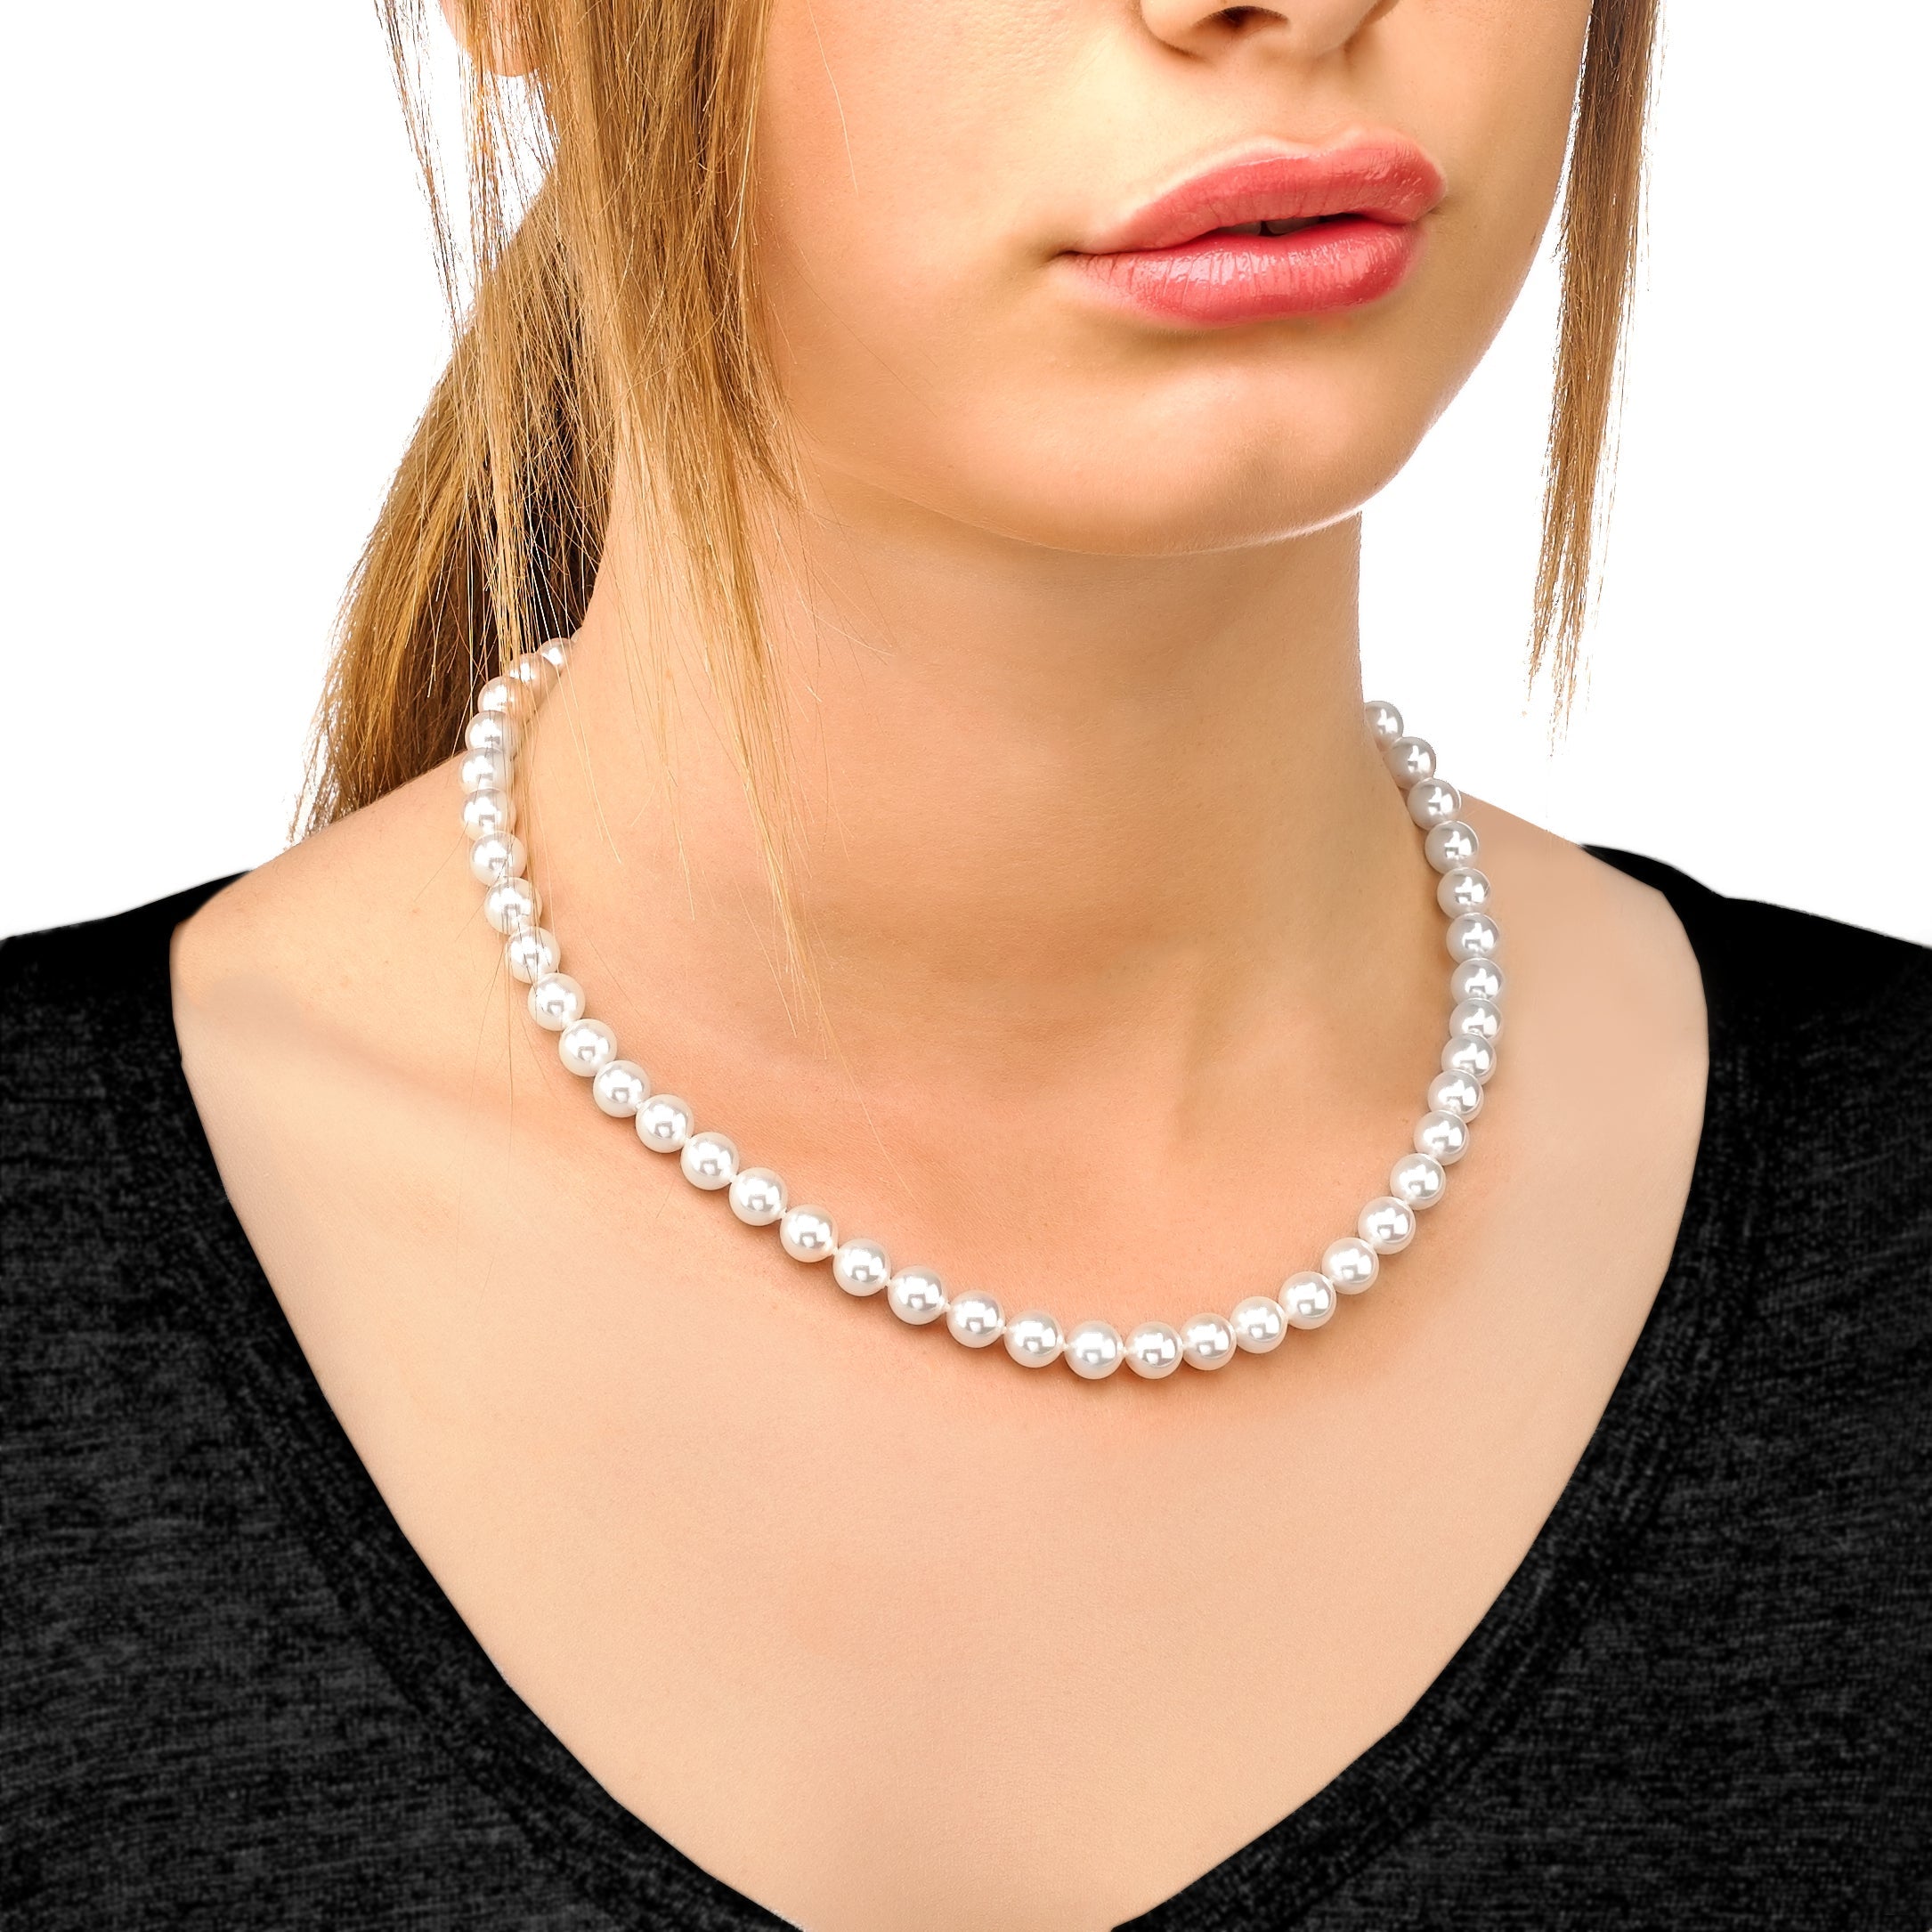 LV Iconic Pearls Necklace S00 - Fashion Jewelry